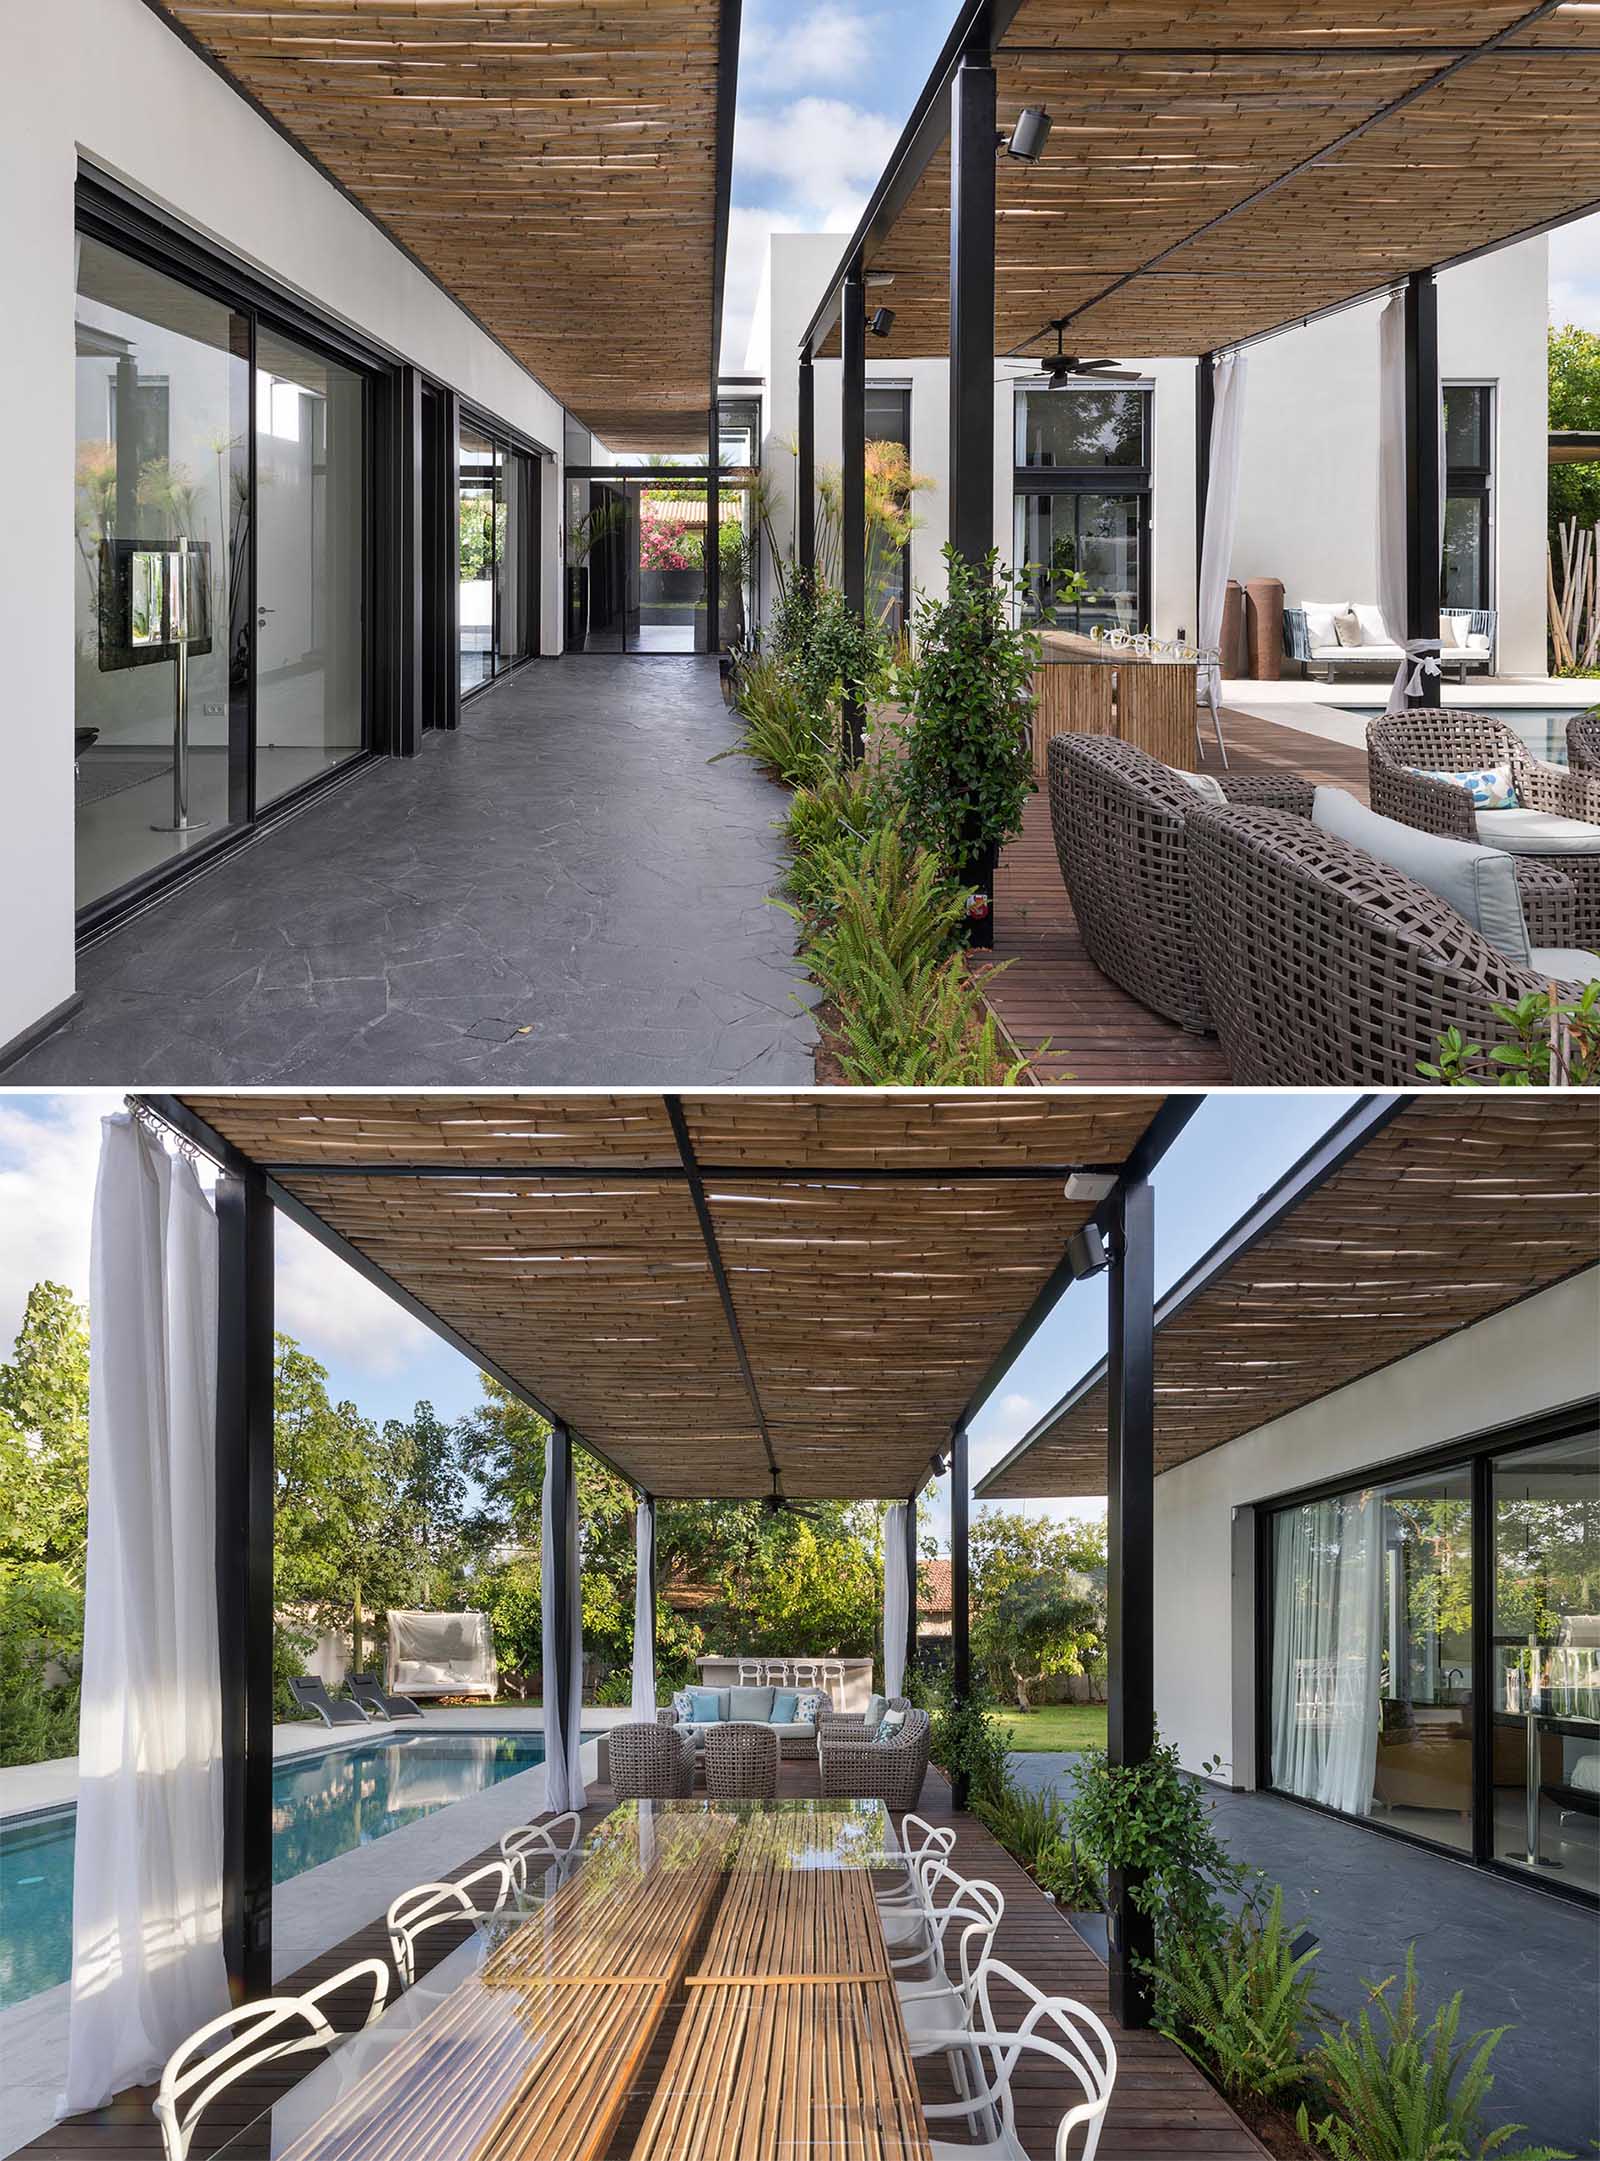 A modern house with a bamboo pergola that shades a pathway and an outdoor living and dining area.